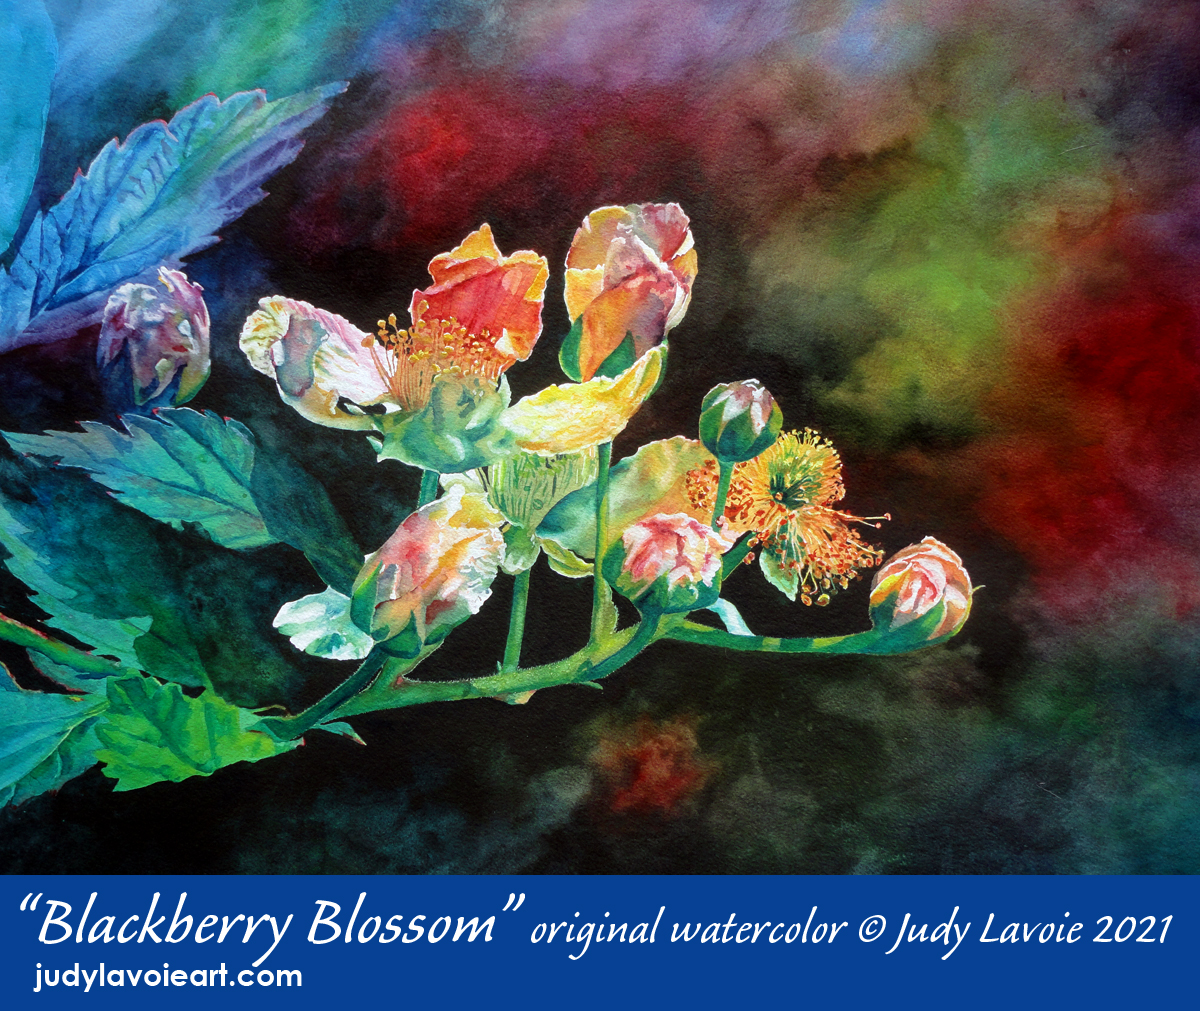 "Blackberry Blossom" title image © Judy Lavoie 2021